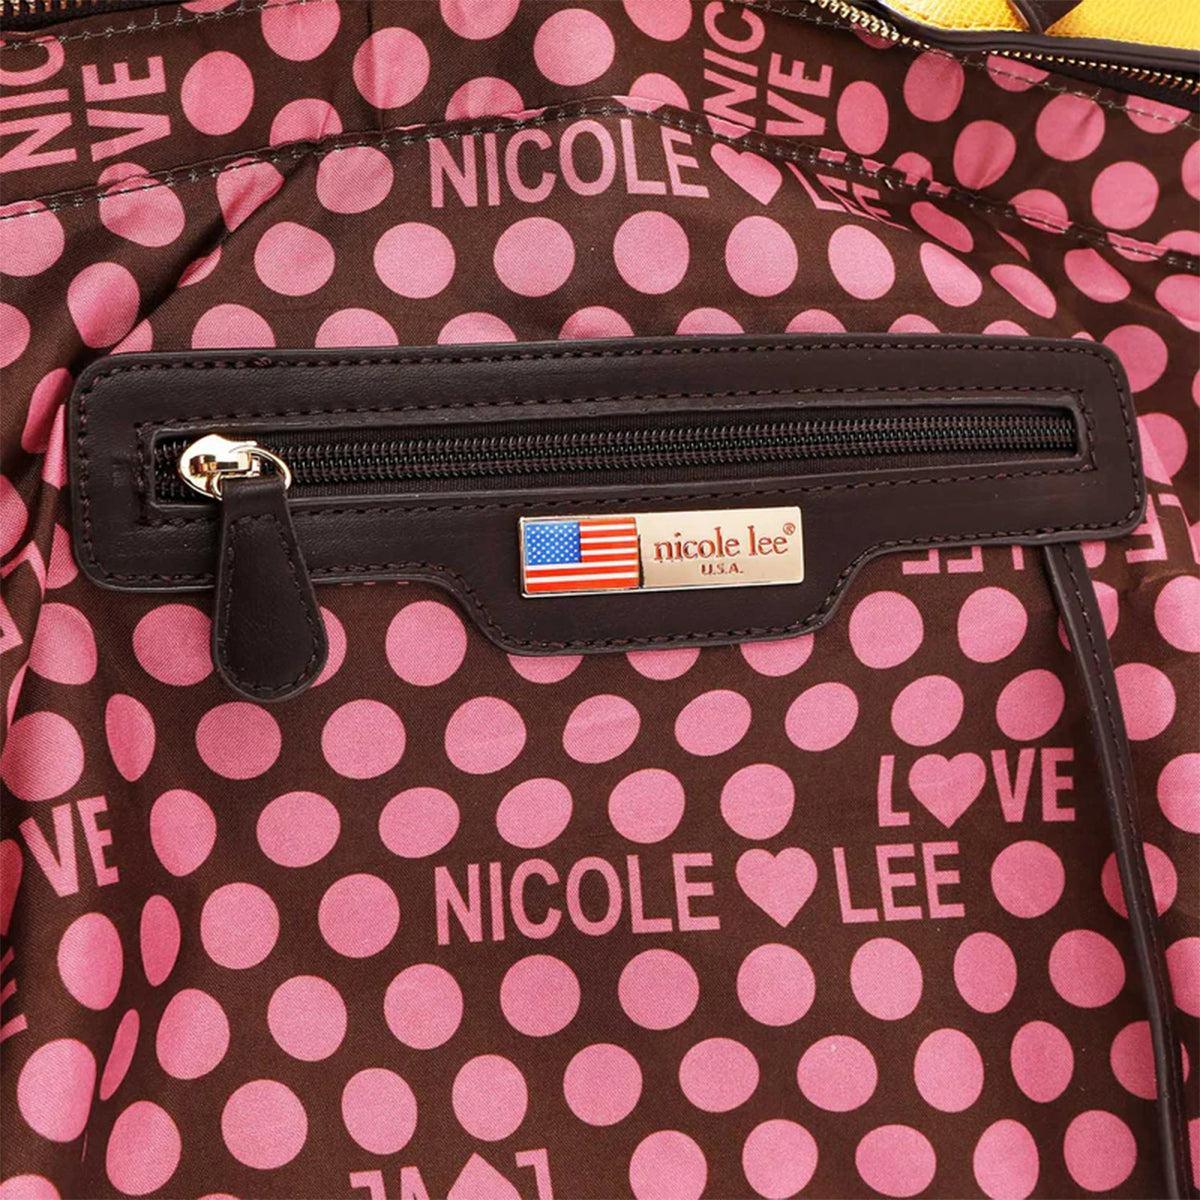 a pink and brown polka dot purse with a name tag